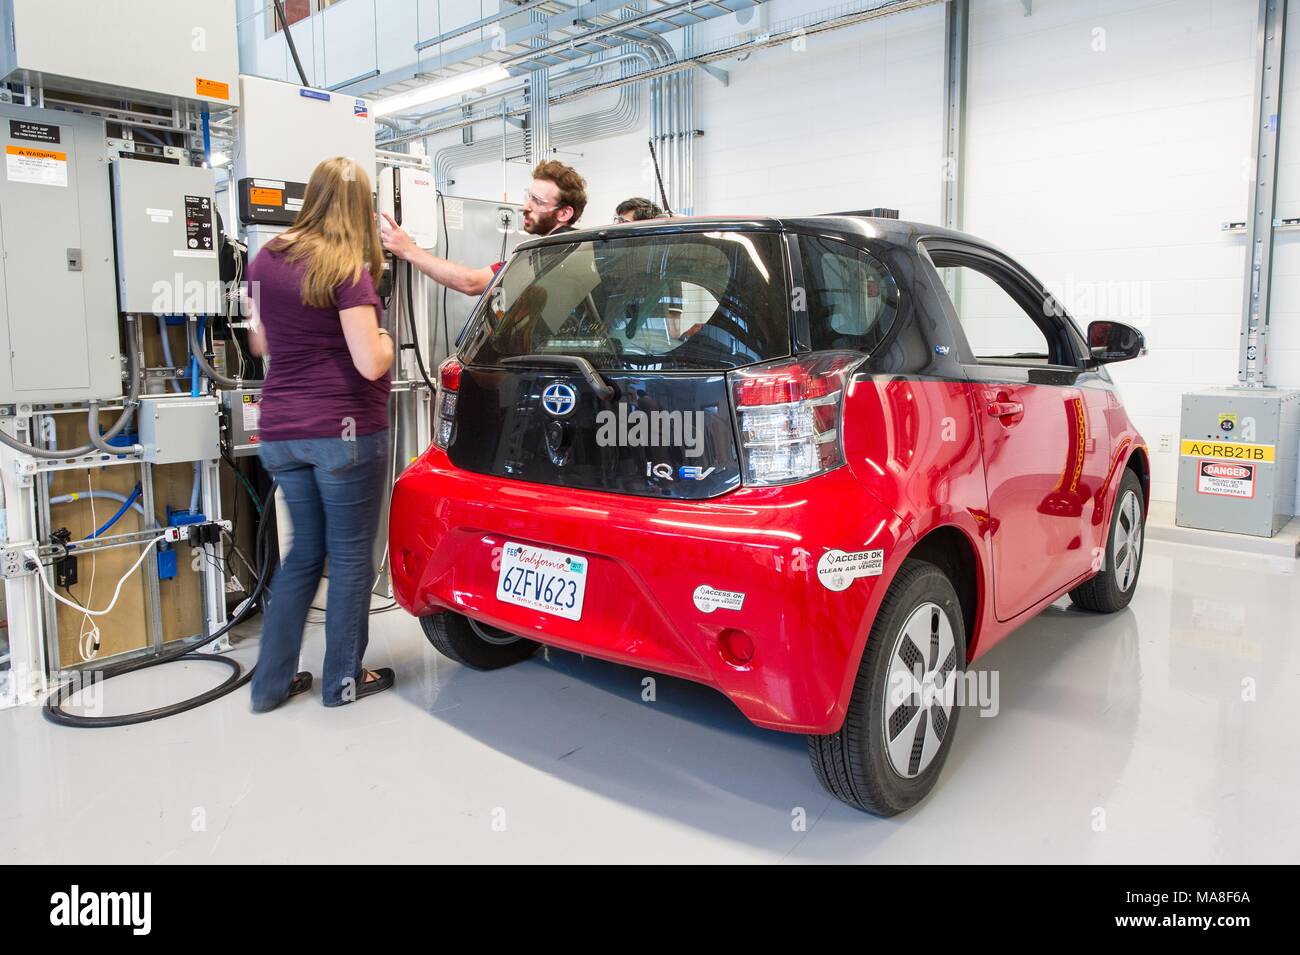 Three National Renewable Energy engineers work on the Electric Vehicle Supply Equipment (EVSE) and PV inverter as part of a 'smart-home-in-the-loop experiment, ' using a red, Toyota Scion, electric car, parked in a laboratory, at the Systems Performance Lab at the Energy Systems Integration Facility (ESIF), image courtesy of the US Department of Energy, July 11, 2016. () Stock Photo